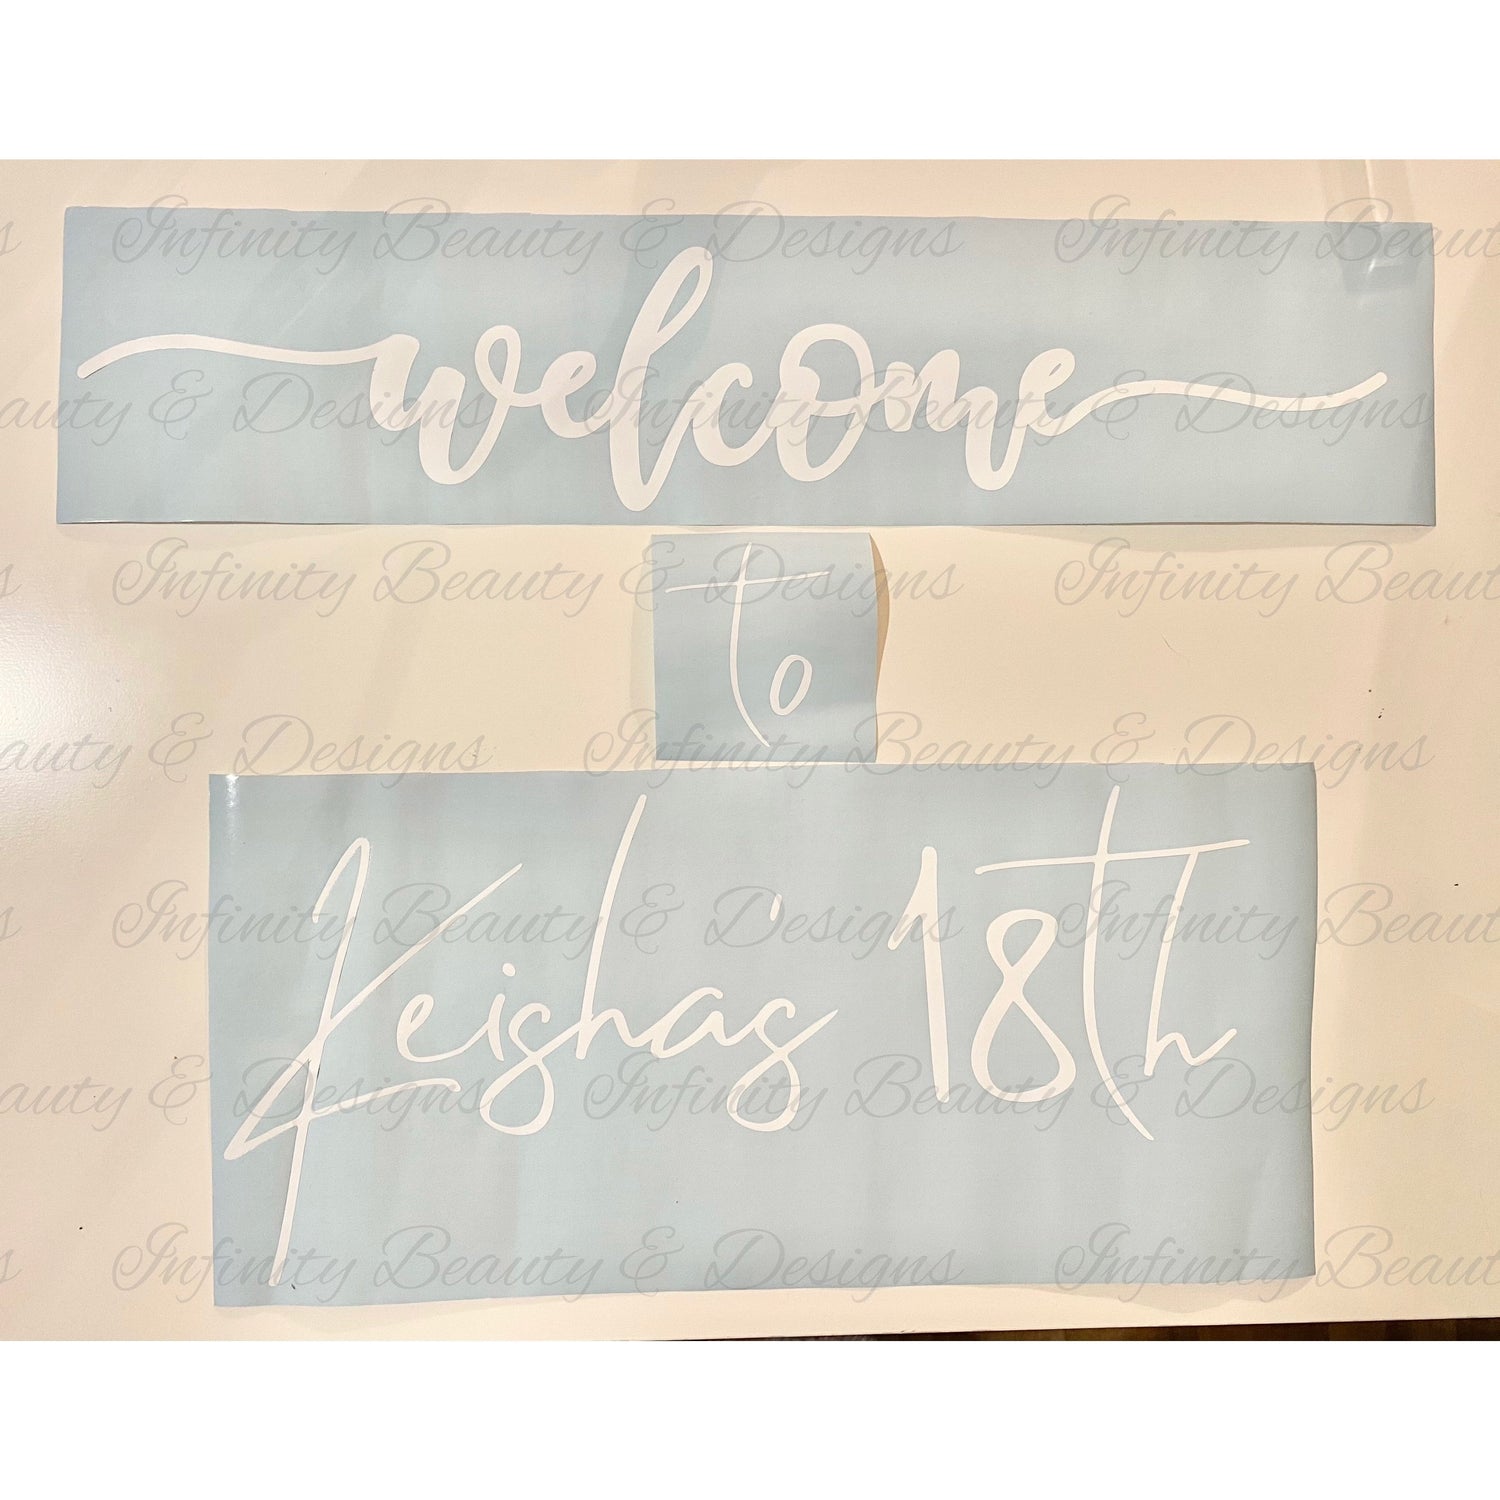 Welcome Sign Decals-Infinity Beauty & Designs